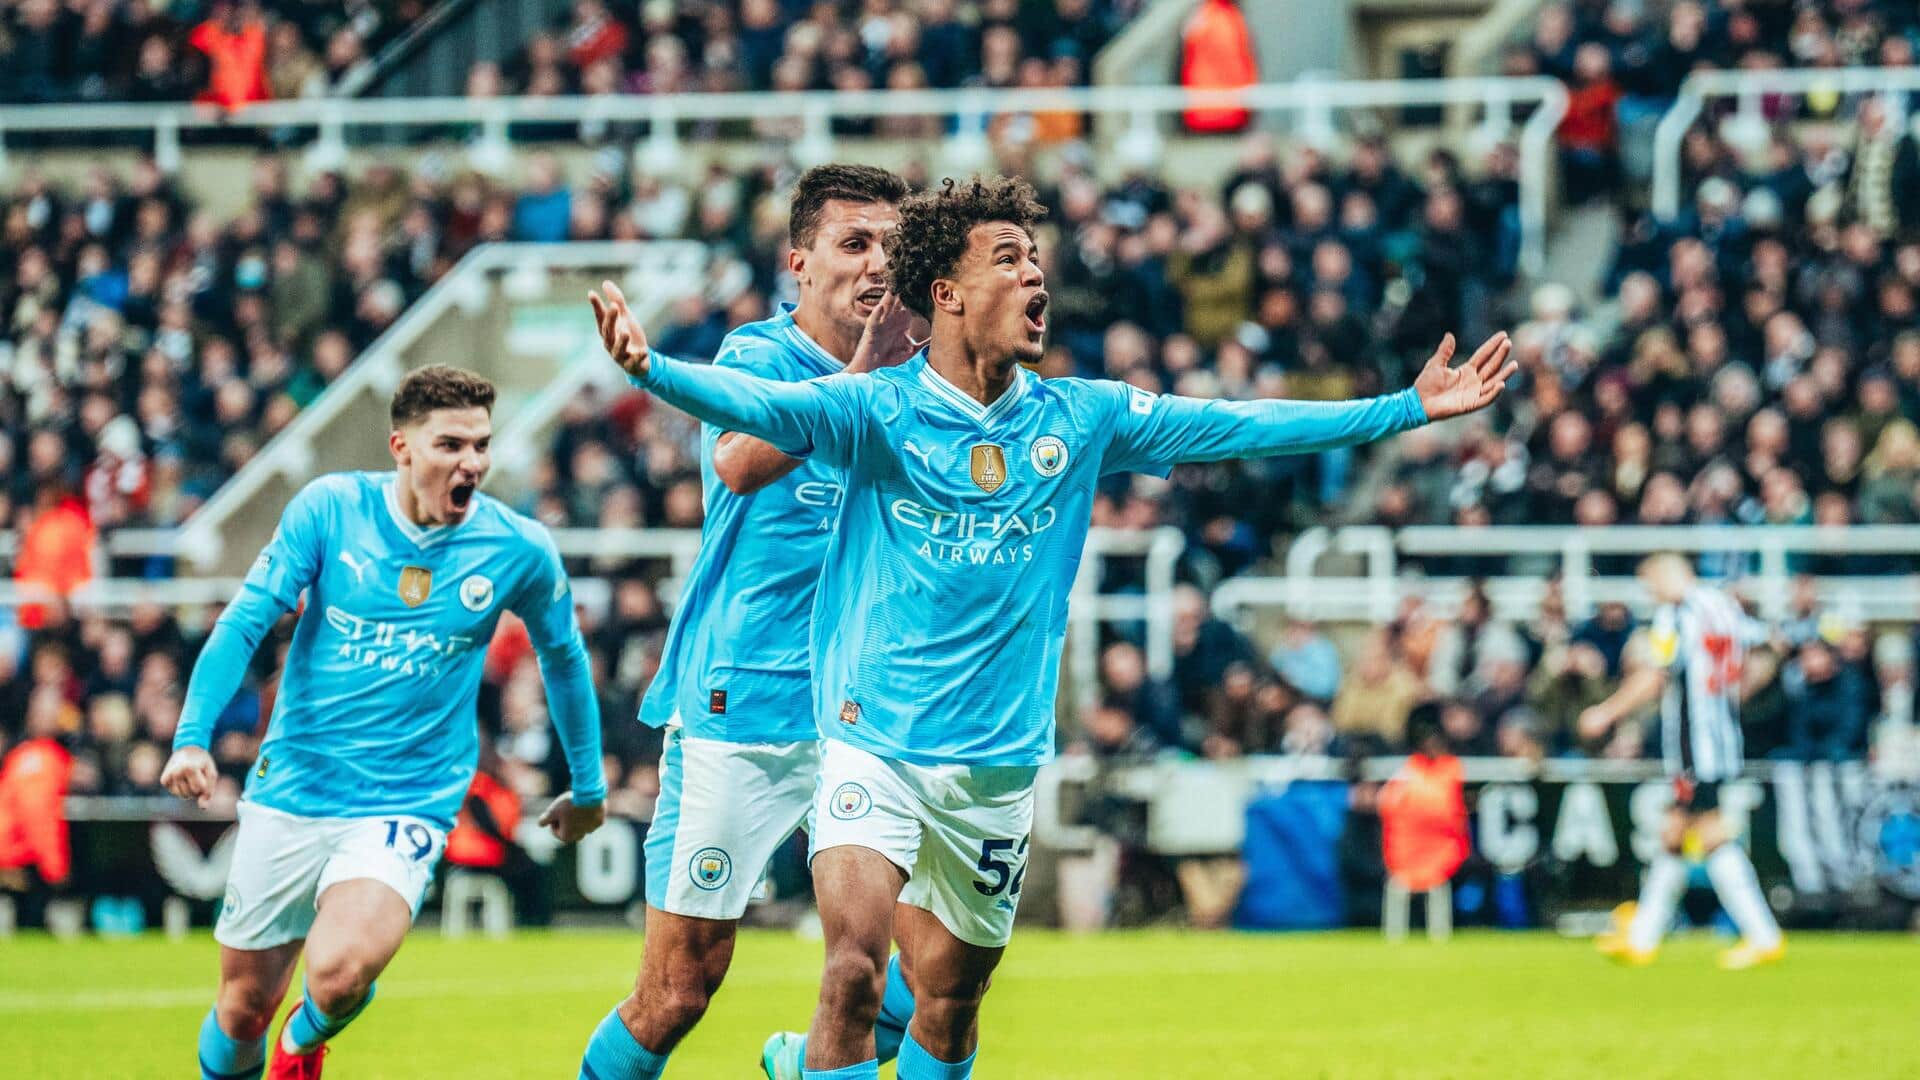 Manchester City come from behind to beat Newcastle United: Stats